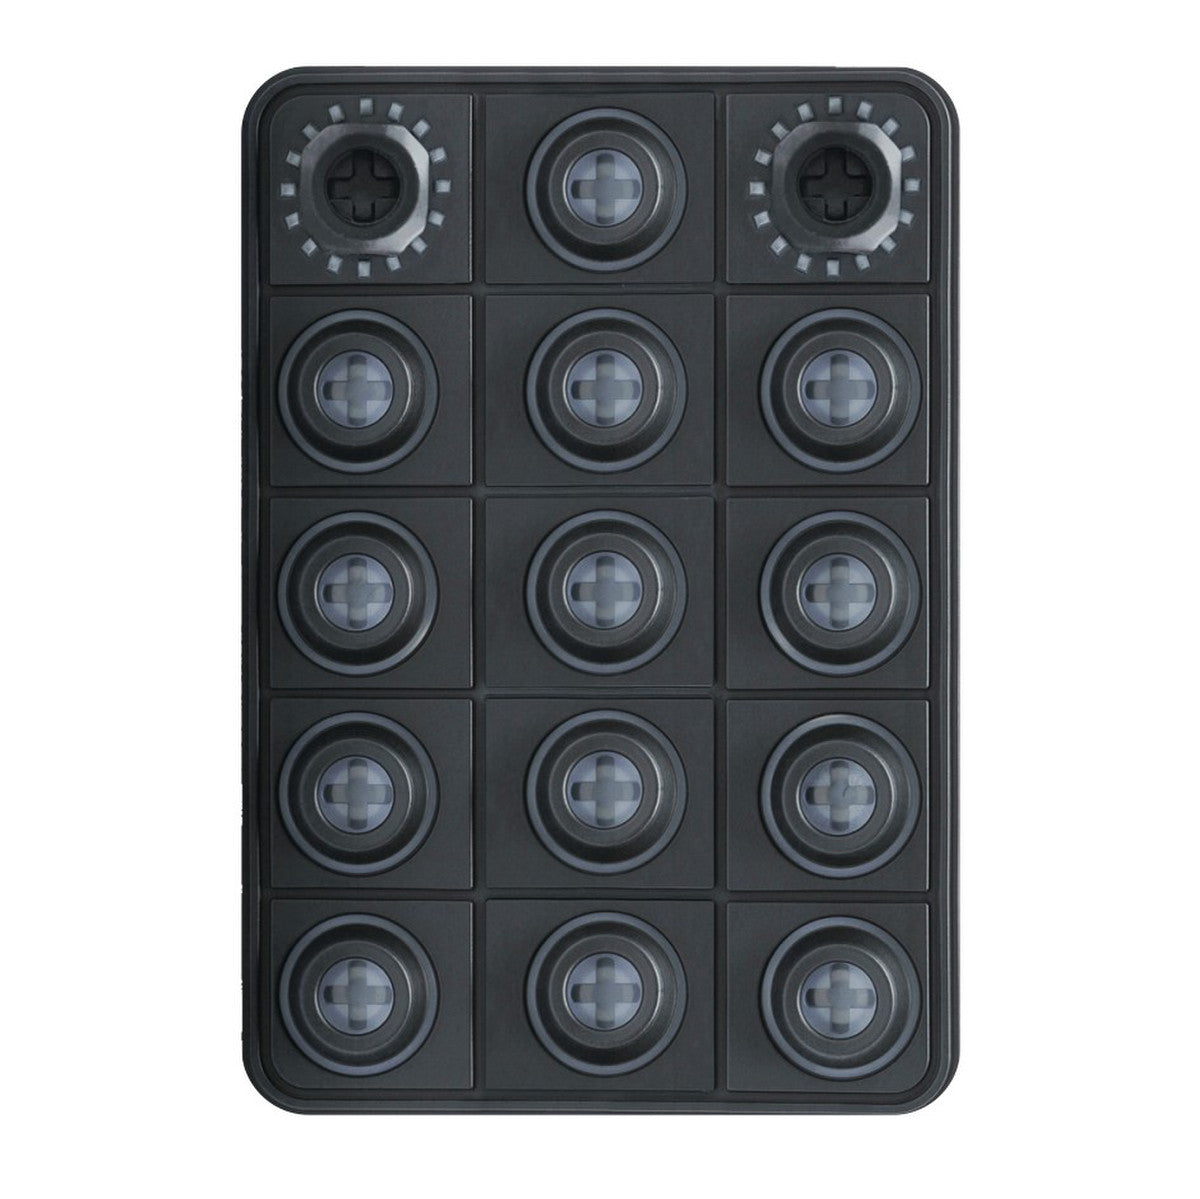 Link CAN Keypad 15 Button + 2 Rotary Encoders